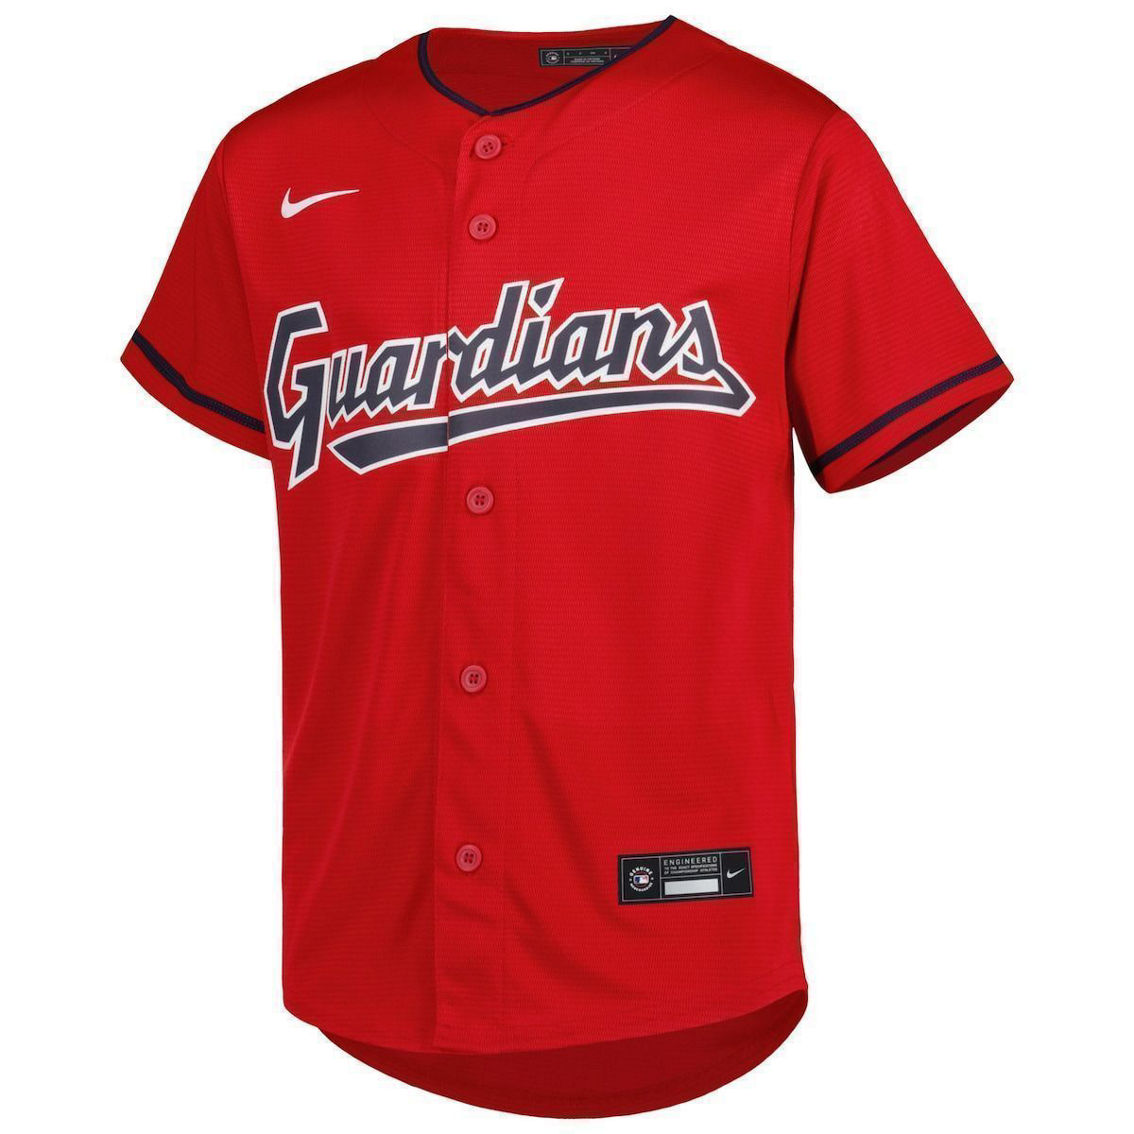 Nike Youth Red Cleveland Guardians Alternate Replica Team Jersey - Image 3 of 4